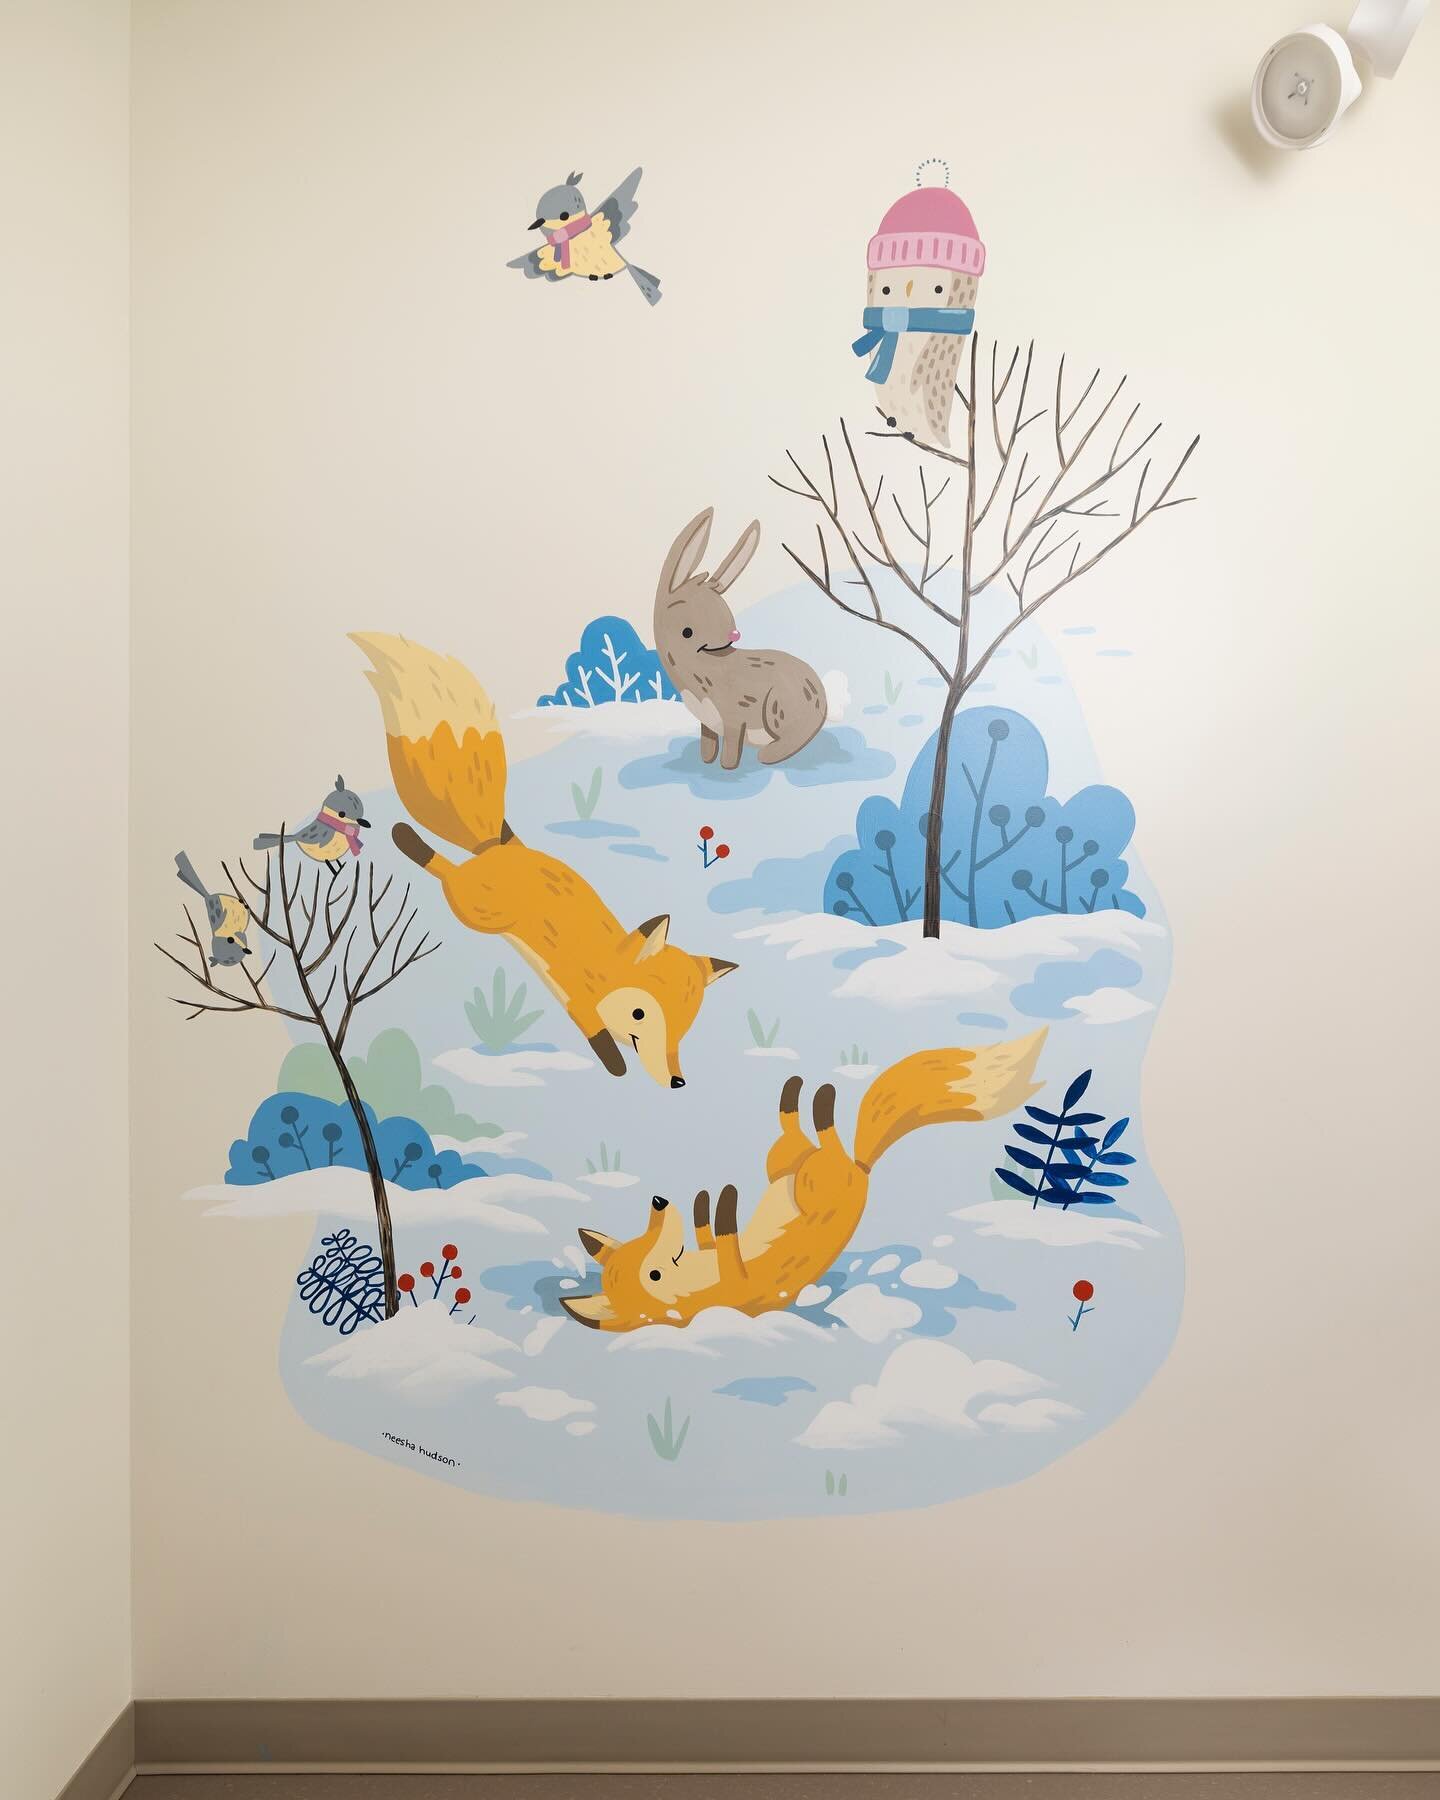 The fox kindergarten bathroom mural in all its glory. The toilet faces this wall so little ones have a bright happy painting to look at while doing their business. Hopefully it distracts them enough so that the automatic flush isn&rsquo;t quite so te